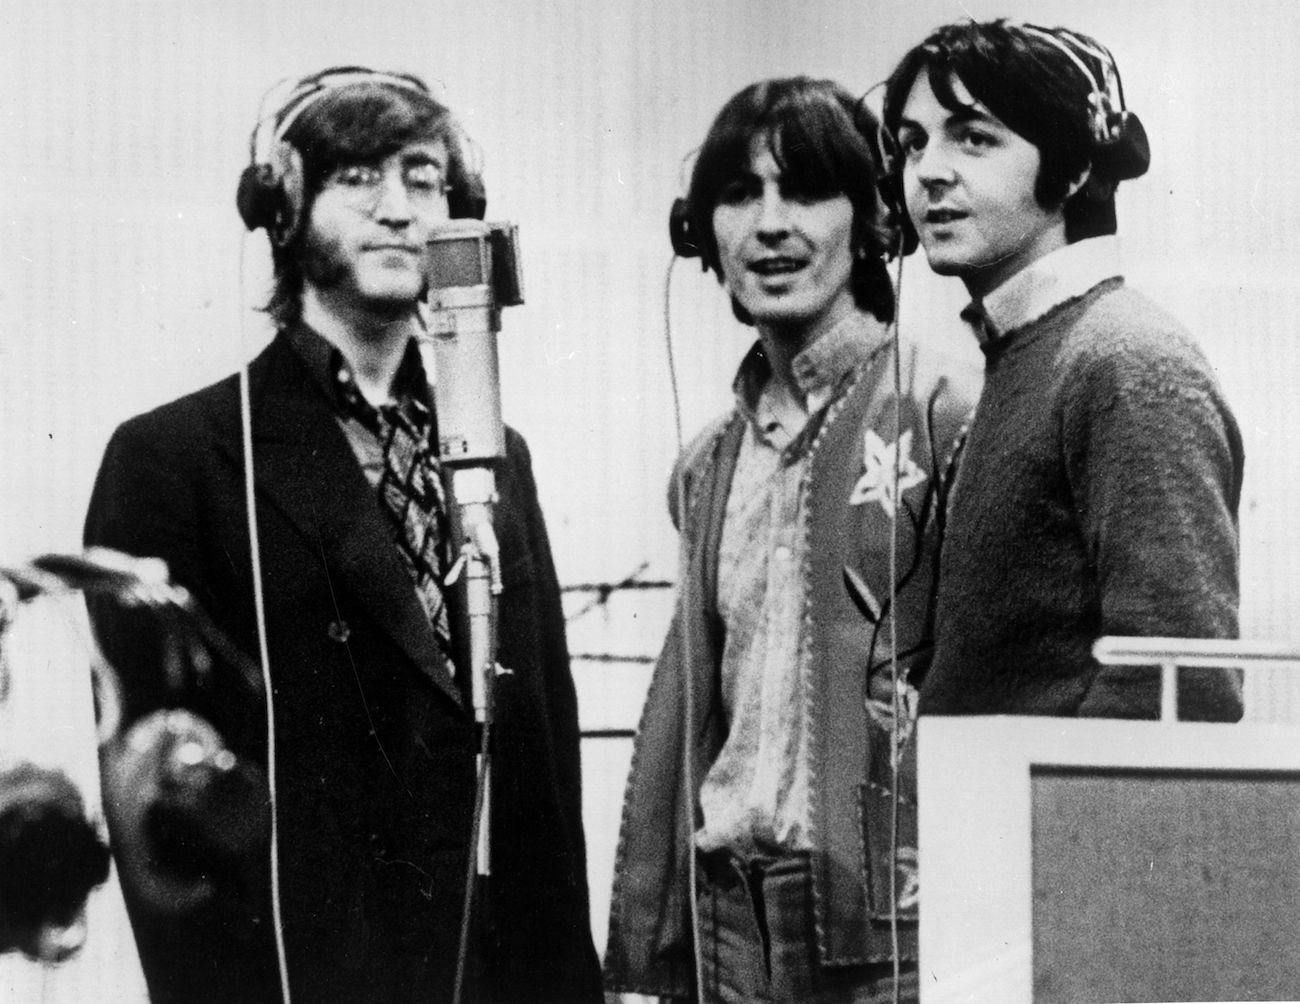 John Lennon, George Harrison, and Paul McCartney of The Beatles in the recording studio in 1968.